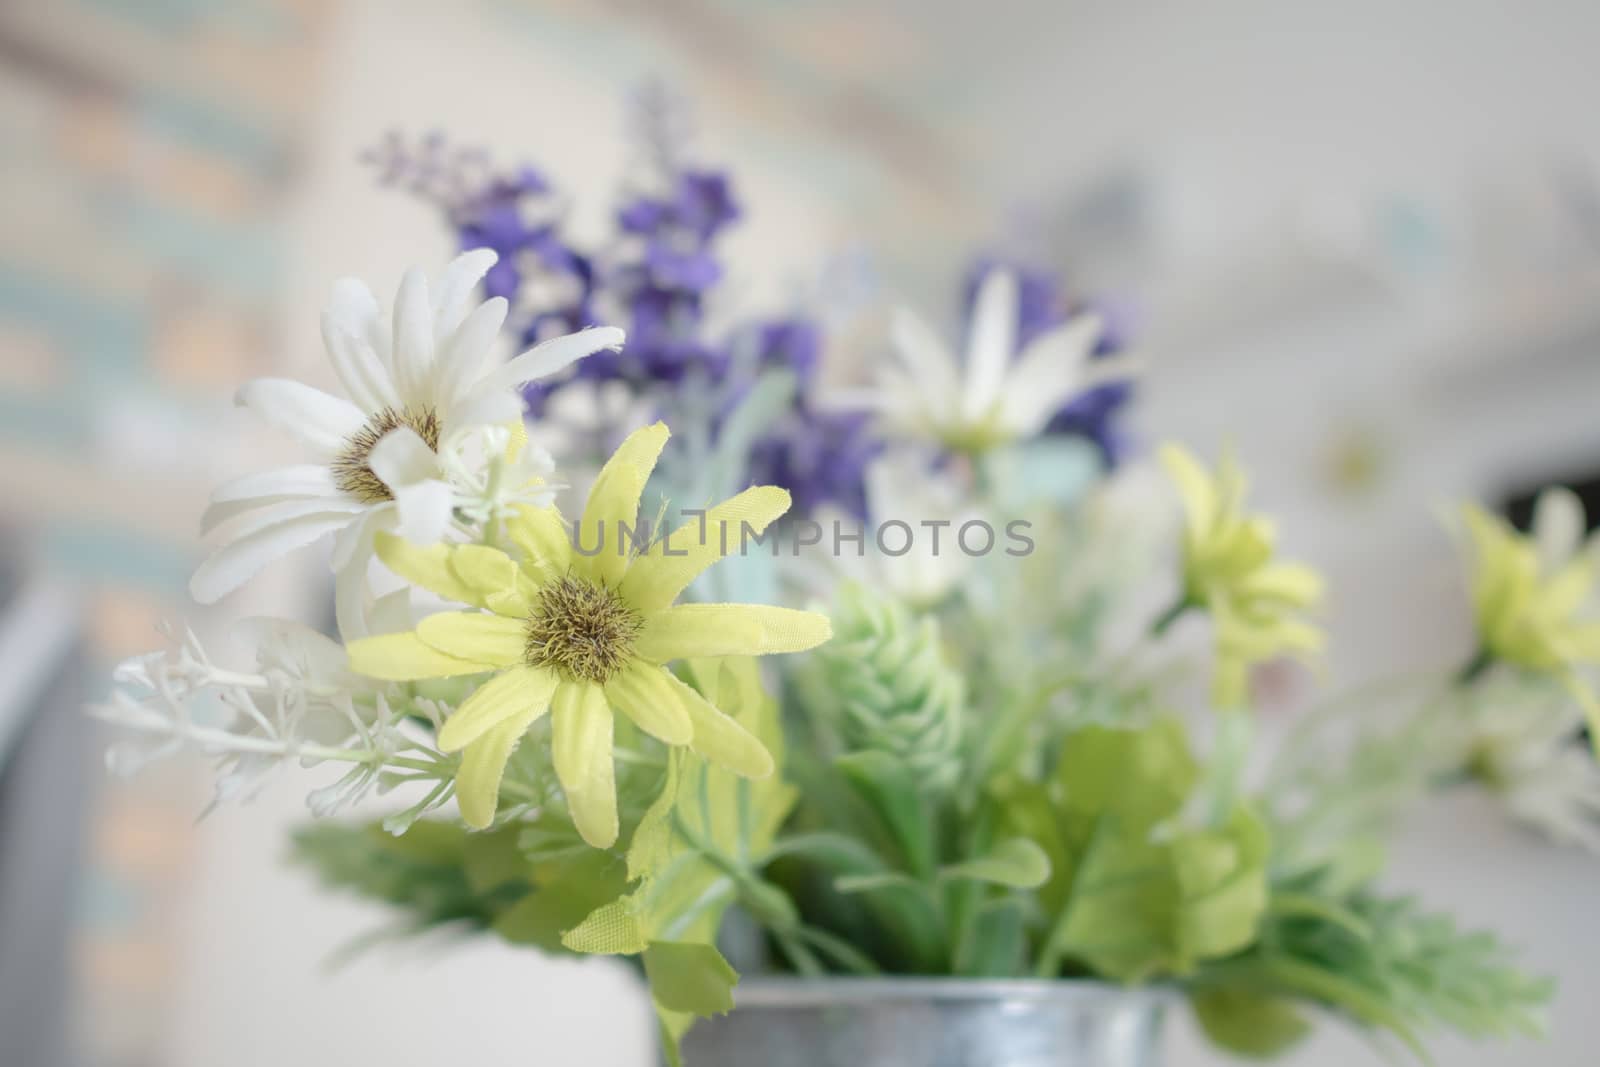 Close up white and green flowers with pollen. Blooming of fake flower and leaf. Select focus shallow depth of field and blurred background.